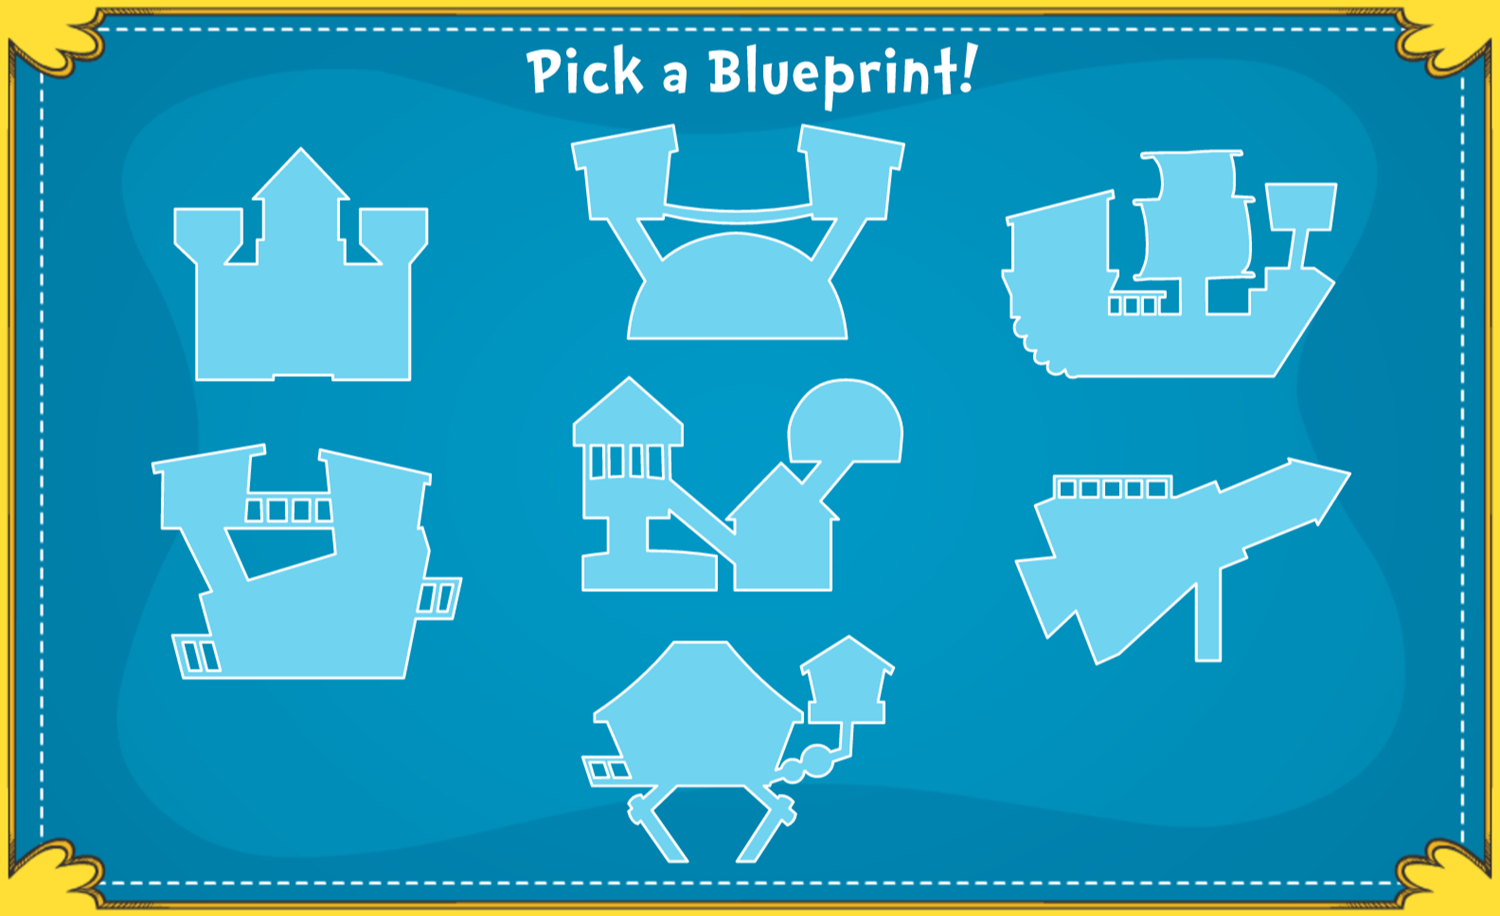 The Cat in the Hat Welcome to Beaver City Game Pick Blueprint Screenshot.